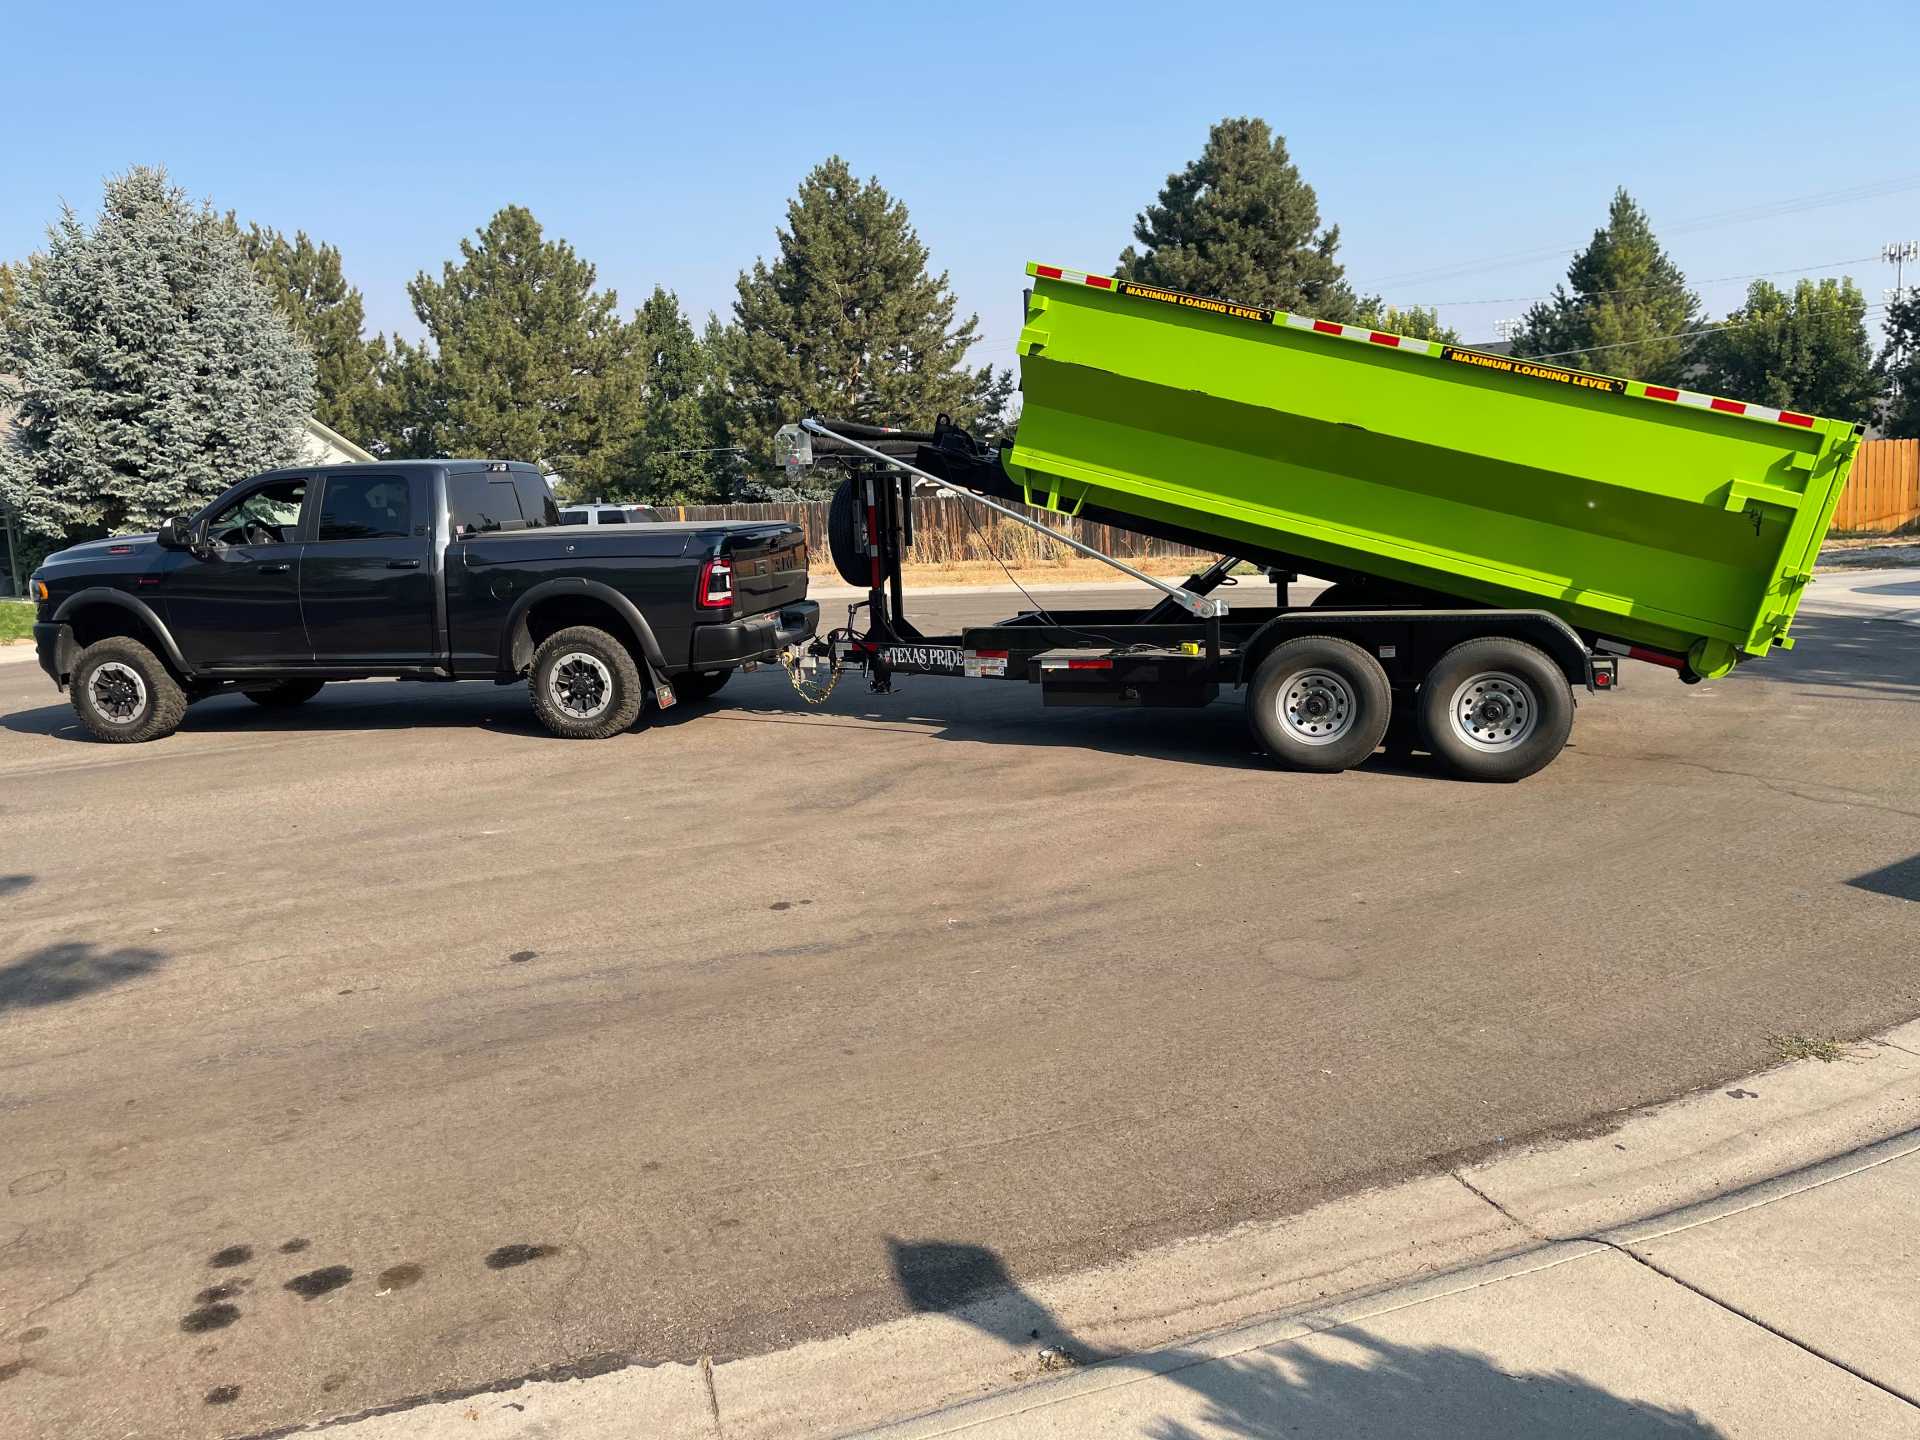 17 cubic yard roll of dumpster with black pick up